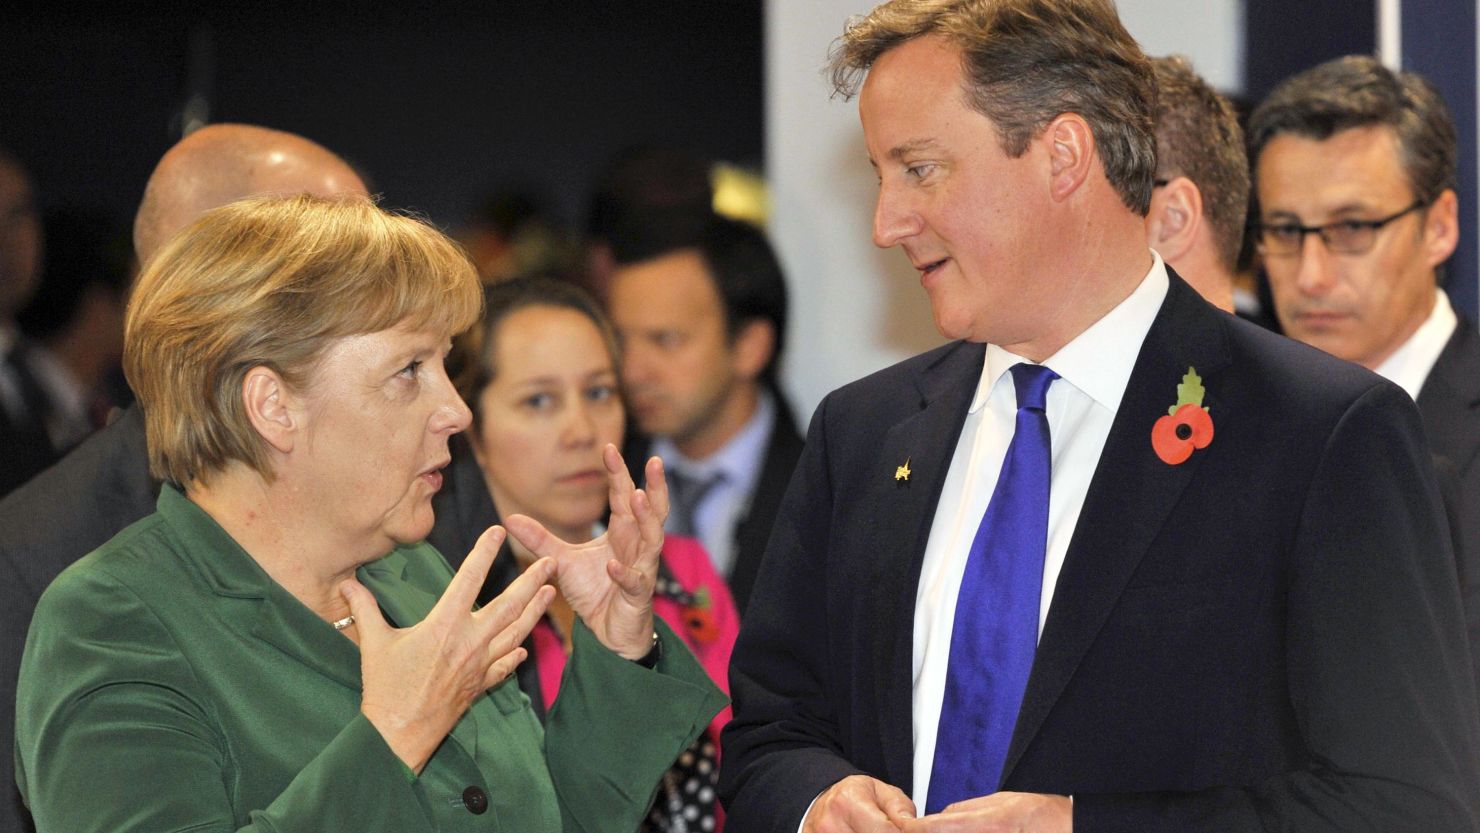 German Chancellor Angela Merkel speaks to Britain's Prime Minister David Cameron at the G20 summit in Cannes, France.